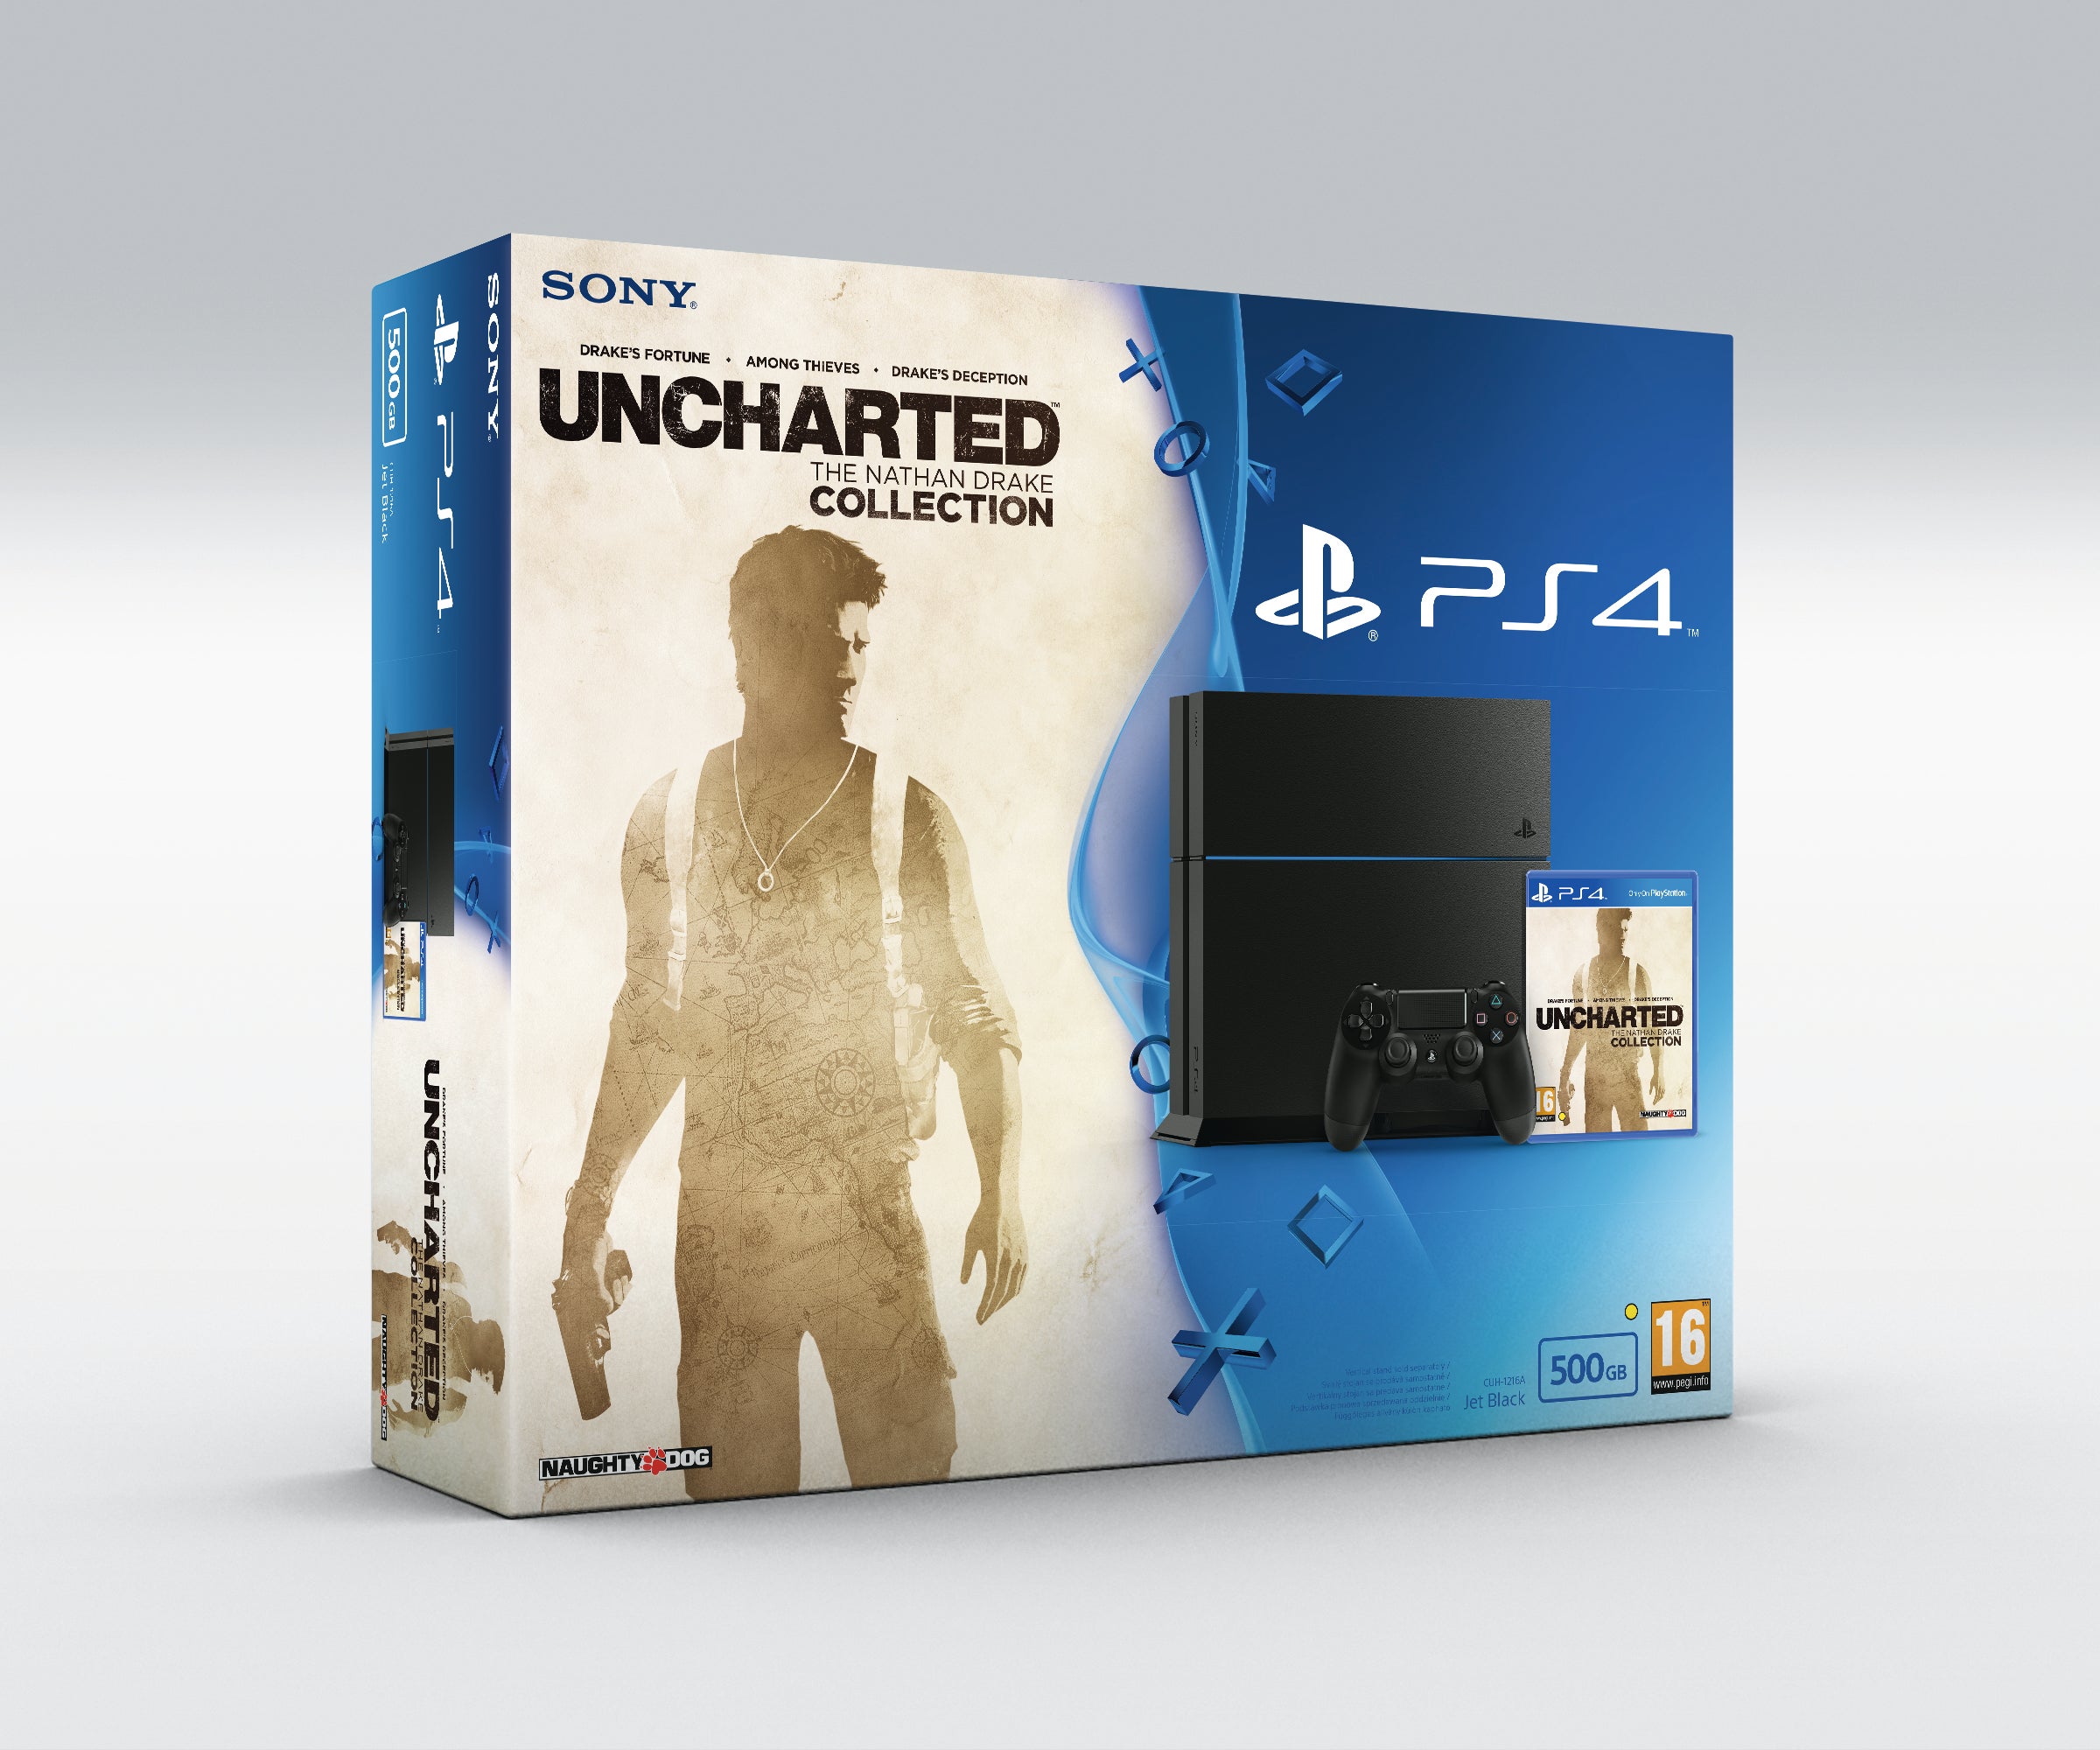 Игра uncharted collection. Uncharted collection ps4. Uncharted коллекция ps4. Uncharted: the Nathan Drake collection. Uncharted Nathan Drake collection ps4.